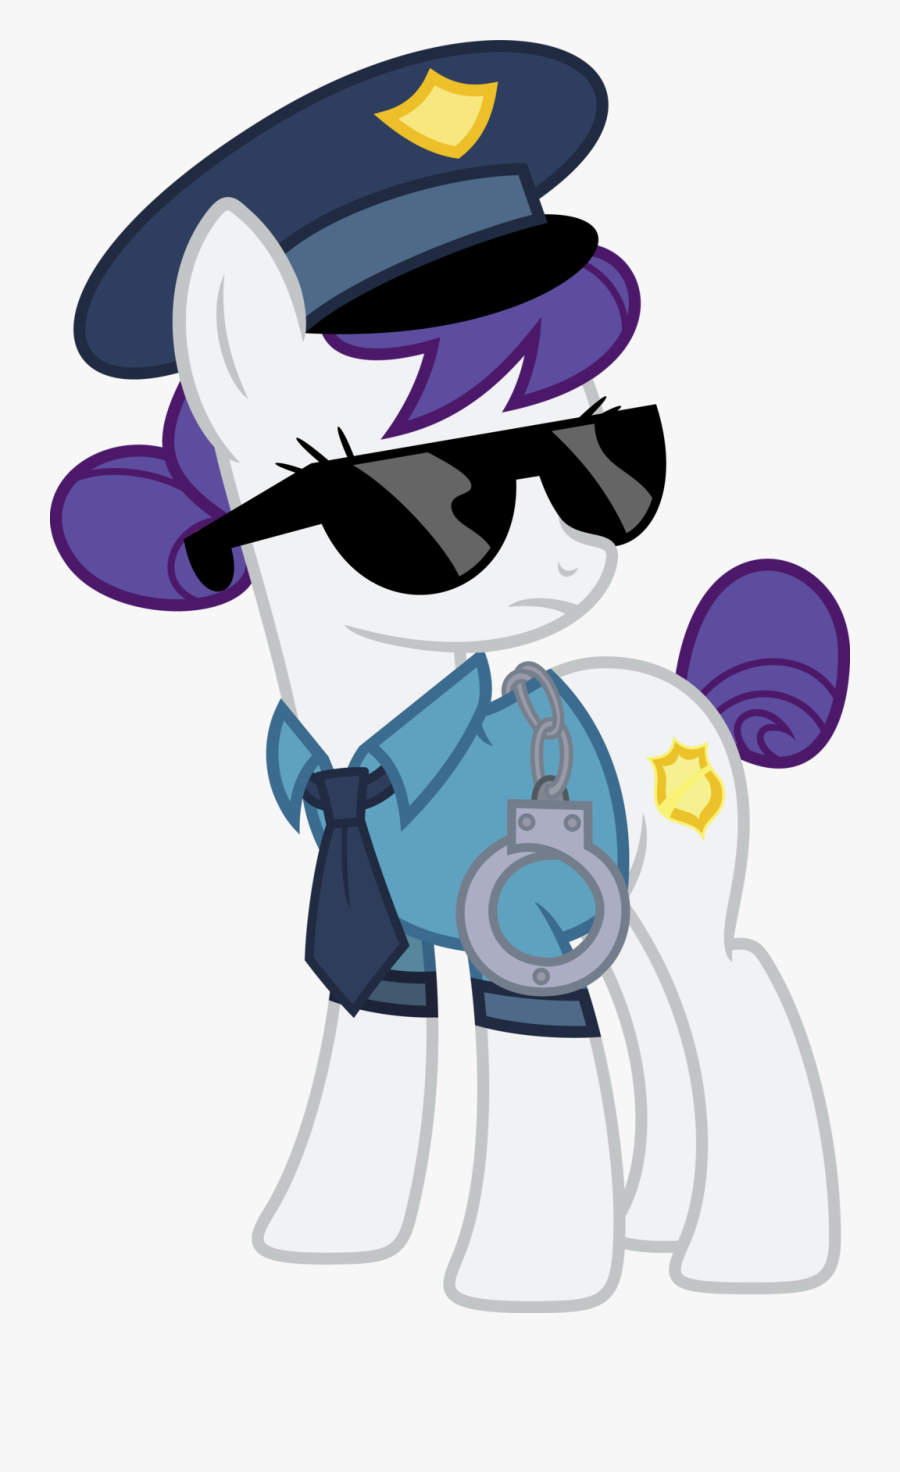 Officer Clipart Fashion Police - Police My Little Pony, Transparent Clipart